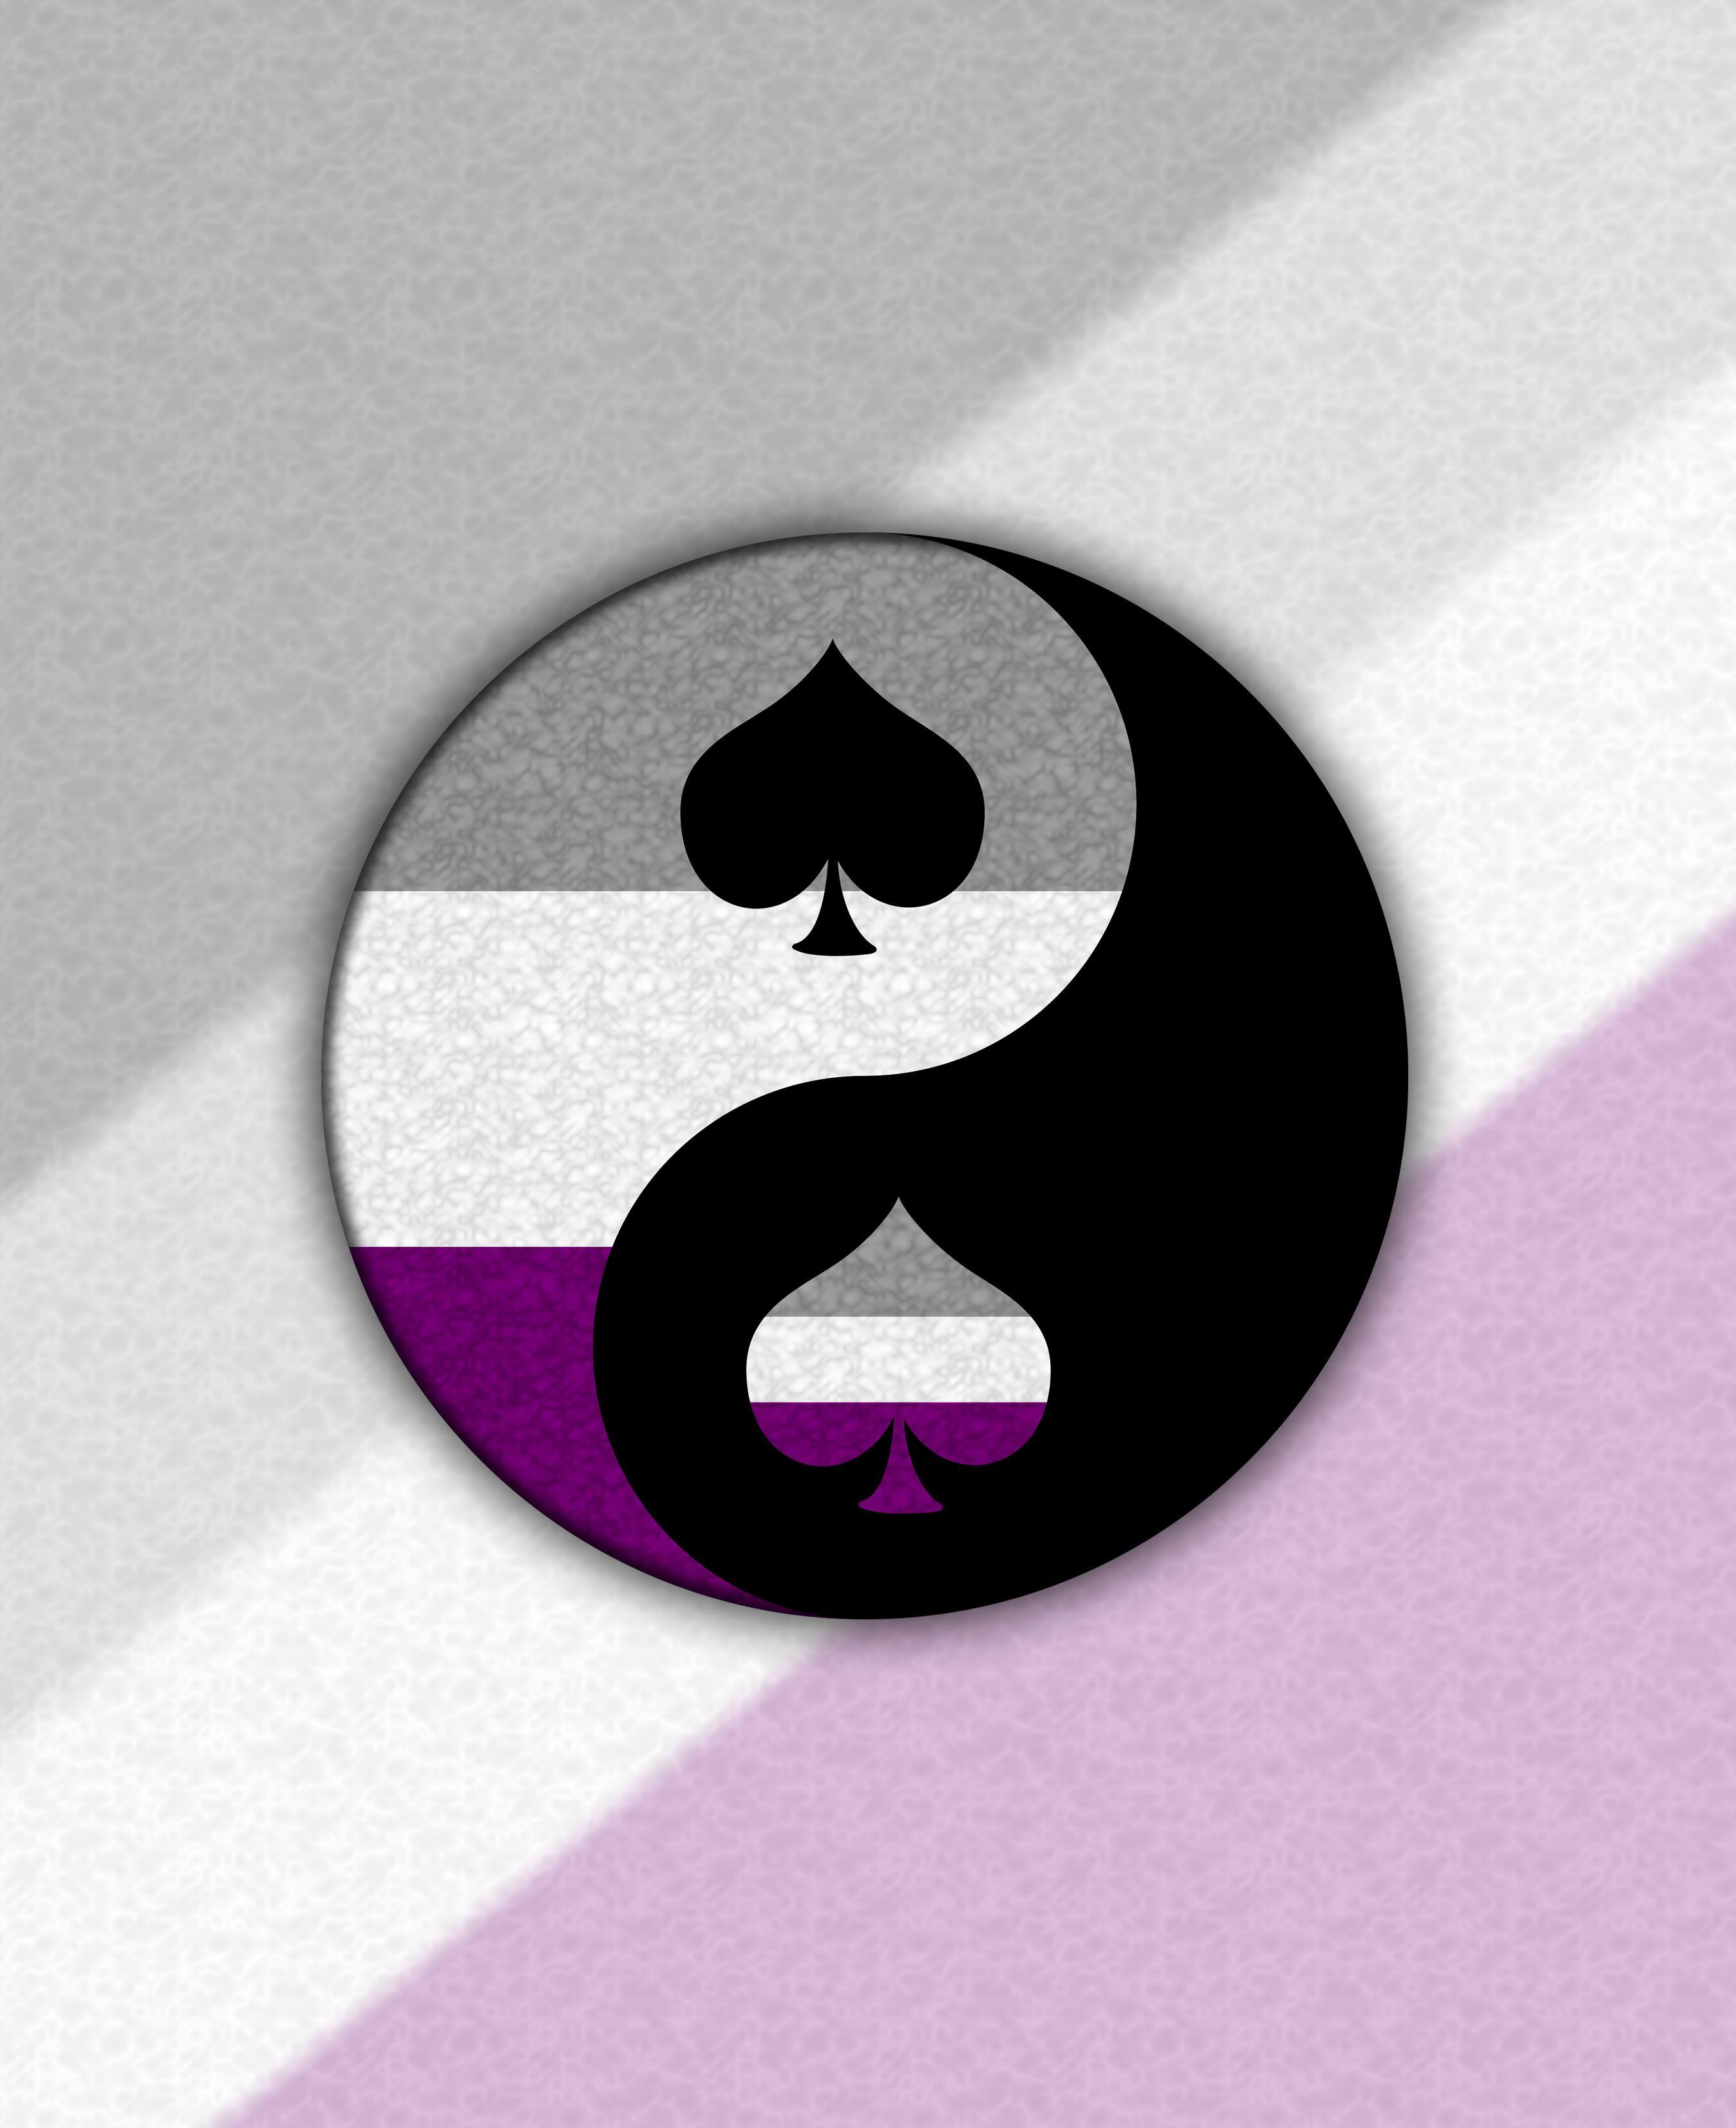 Purple and White Circle Logo - Asexual pride Yin and Yang with spade symbols. Black, gray, white ...